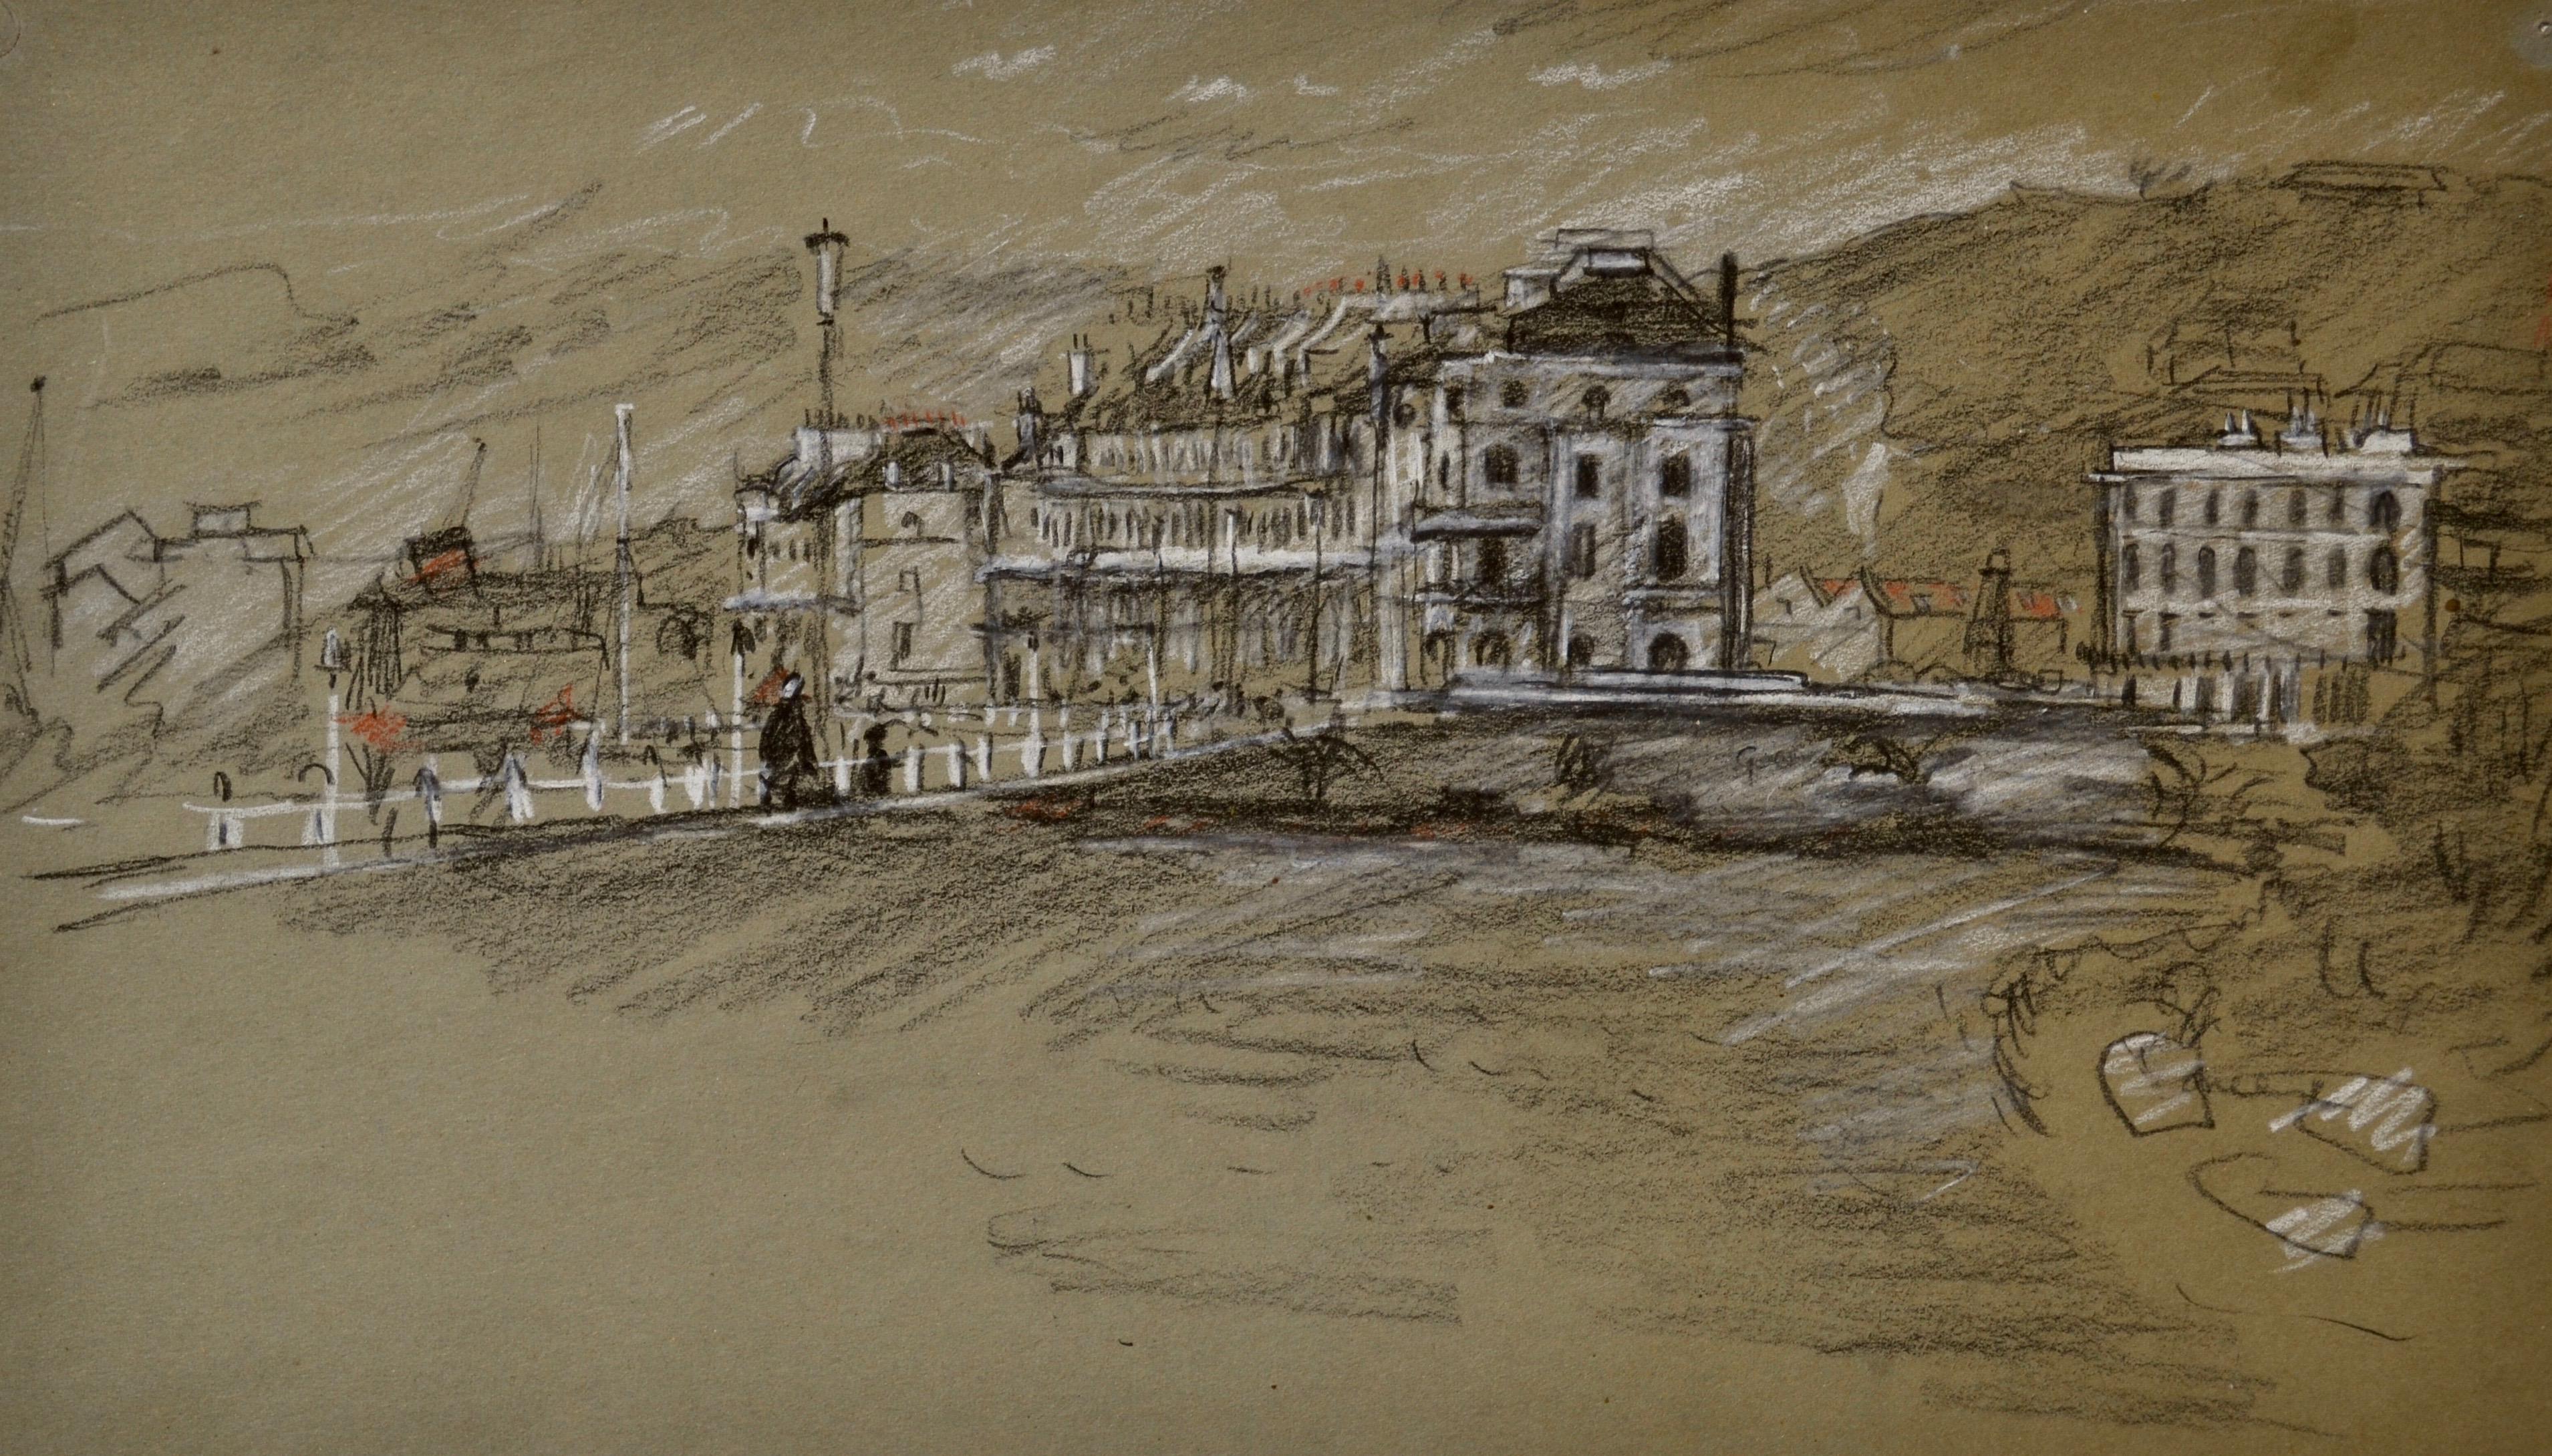 Waterloo Crescent, Dover - 20th Century British chalk drawing by John Sergeant